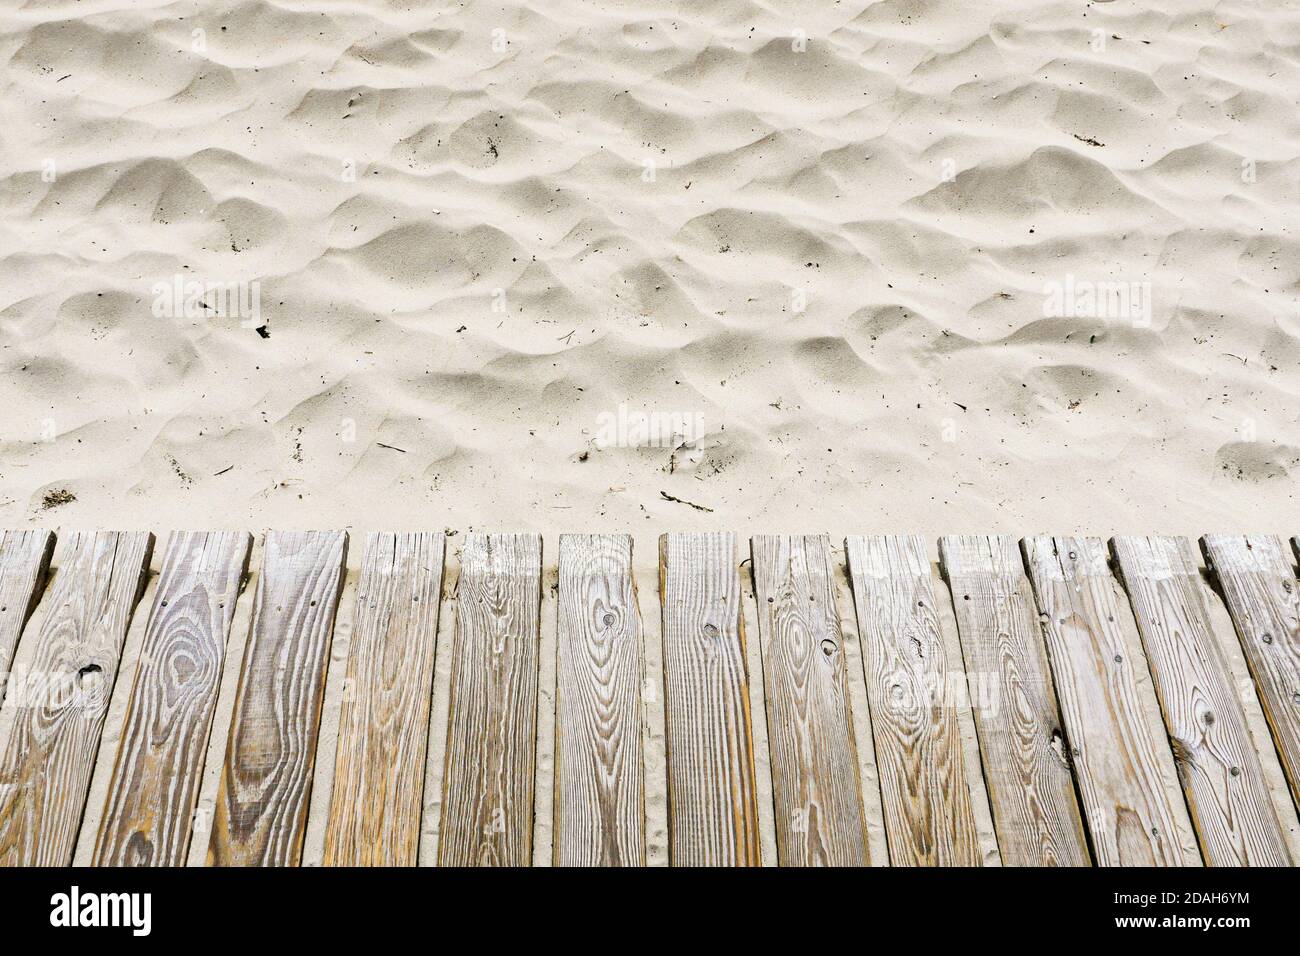 Wooden planked walkway on white beach sand. High angle view. Stock Photo